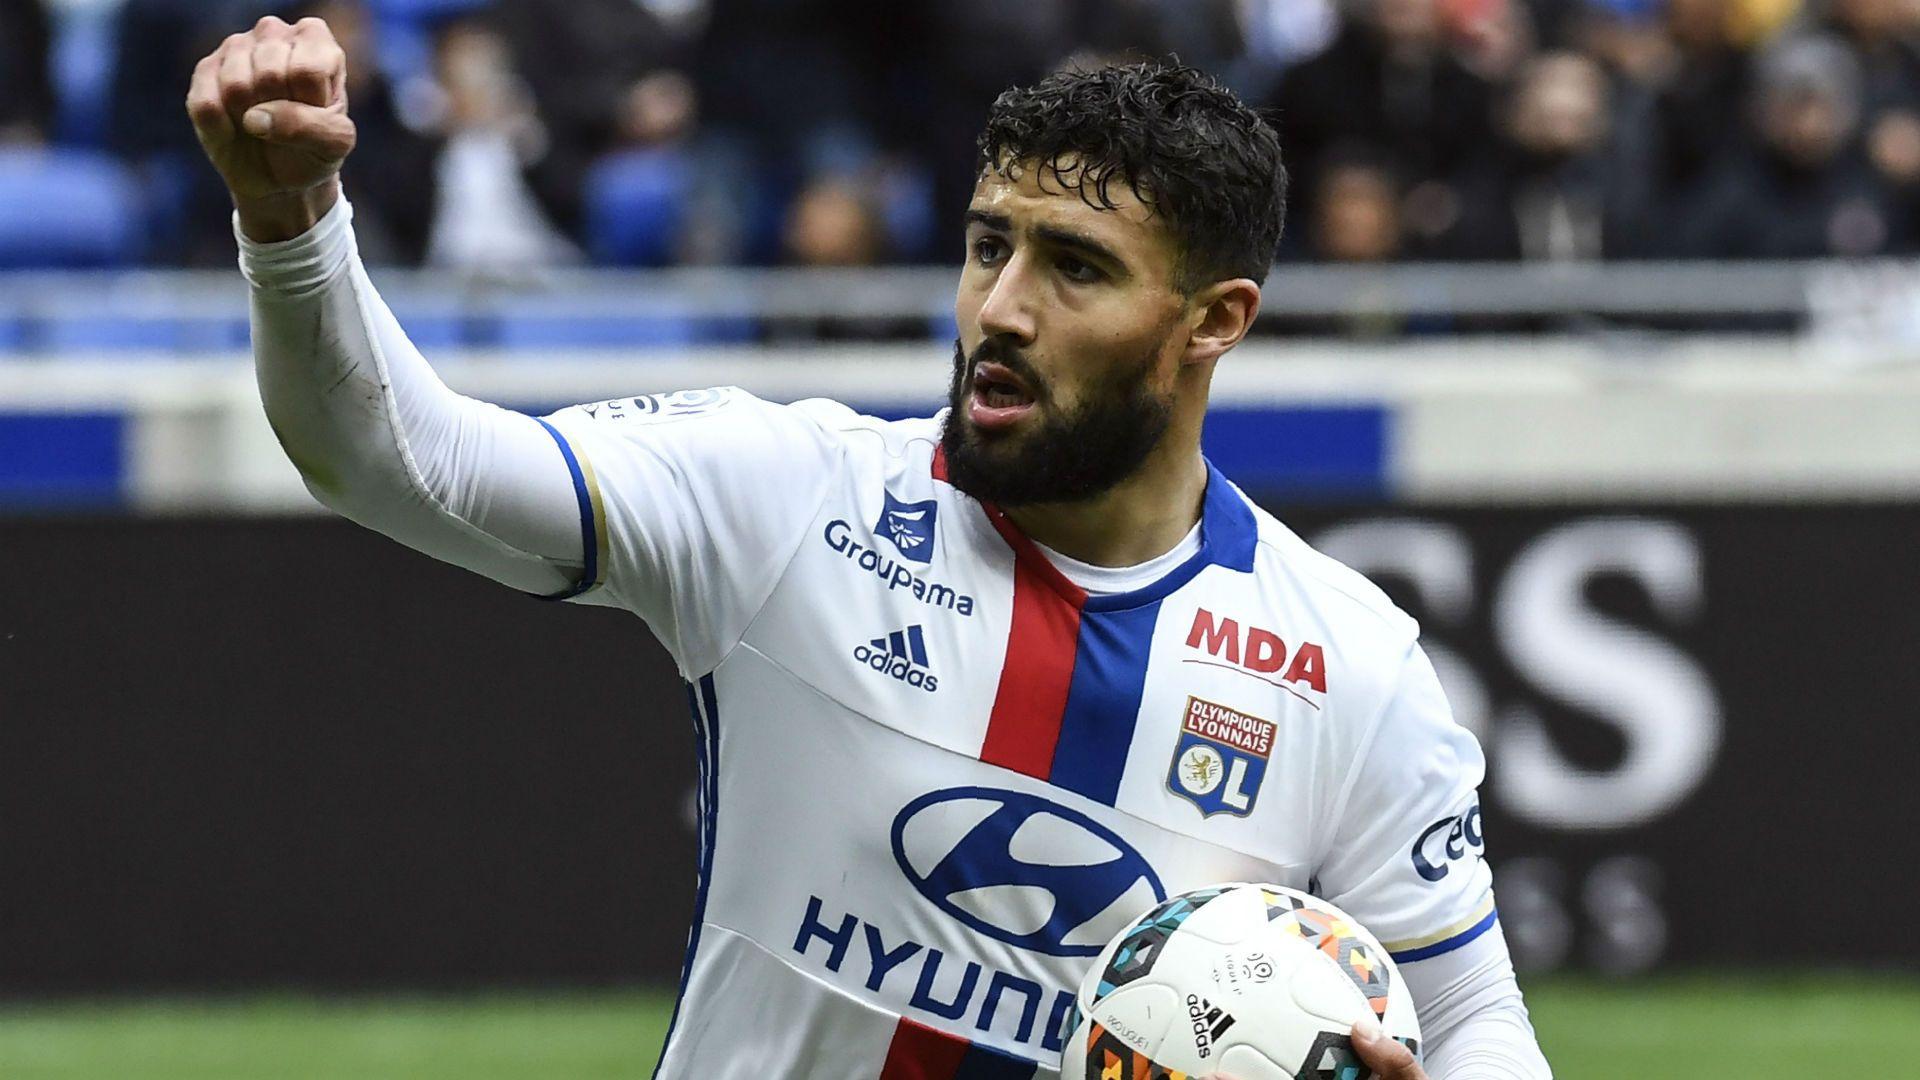 Fekir named new Lyon captain following Gonalons and Lacazette